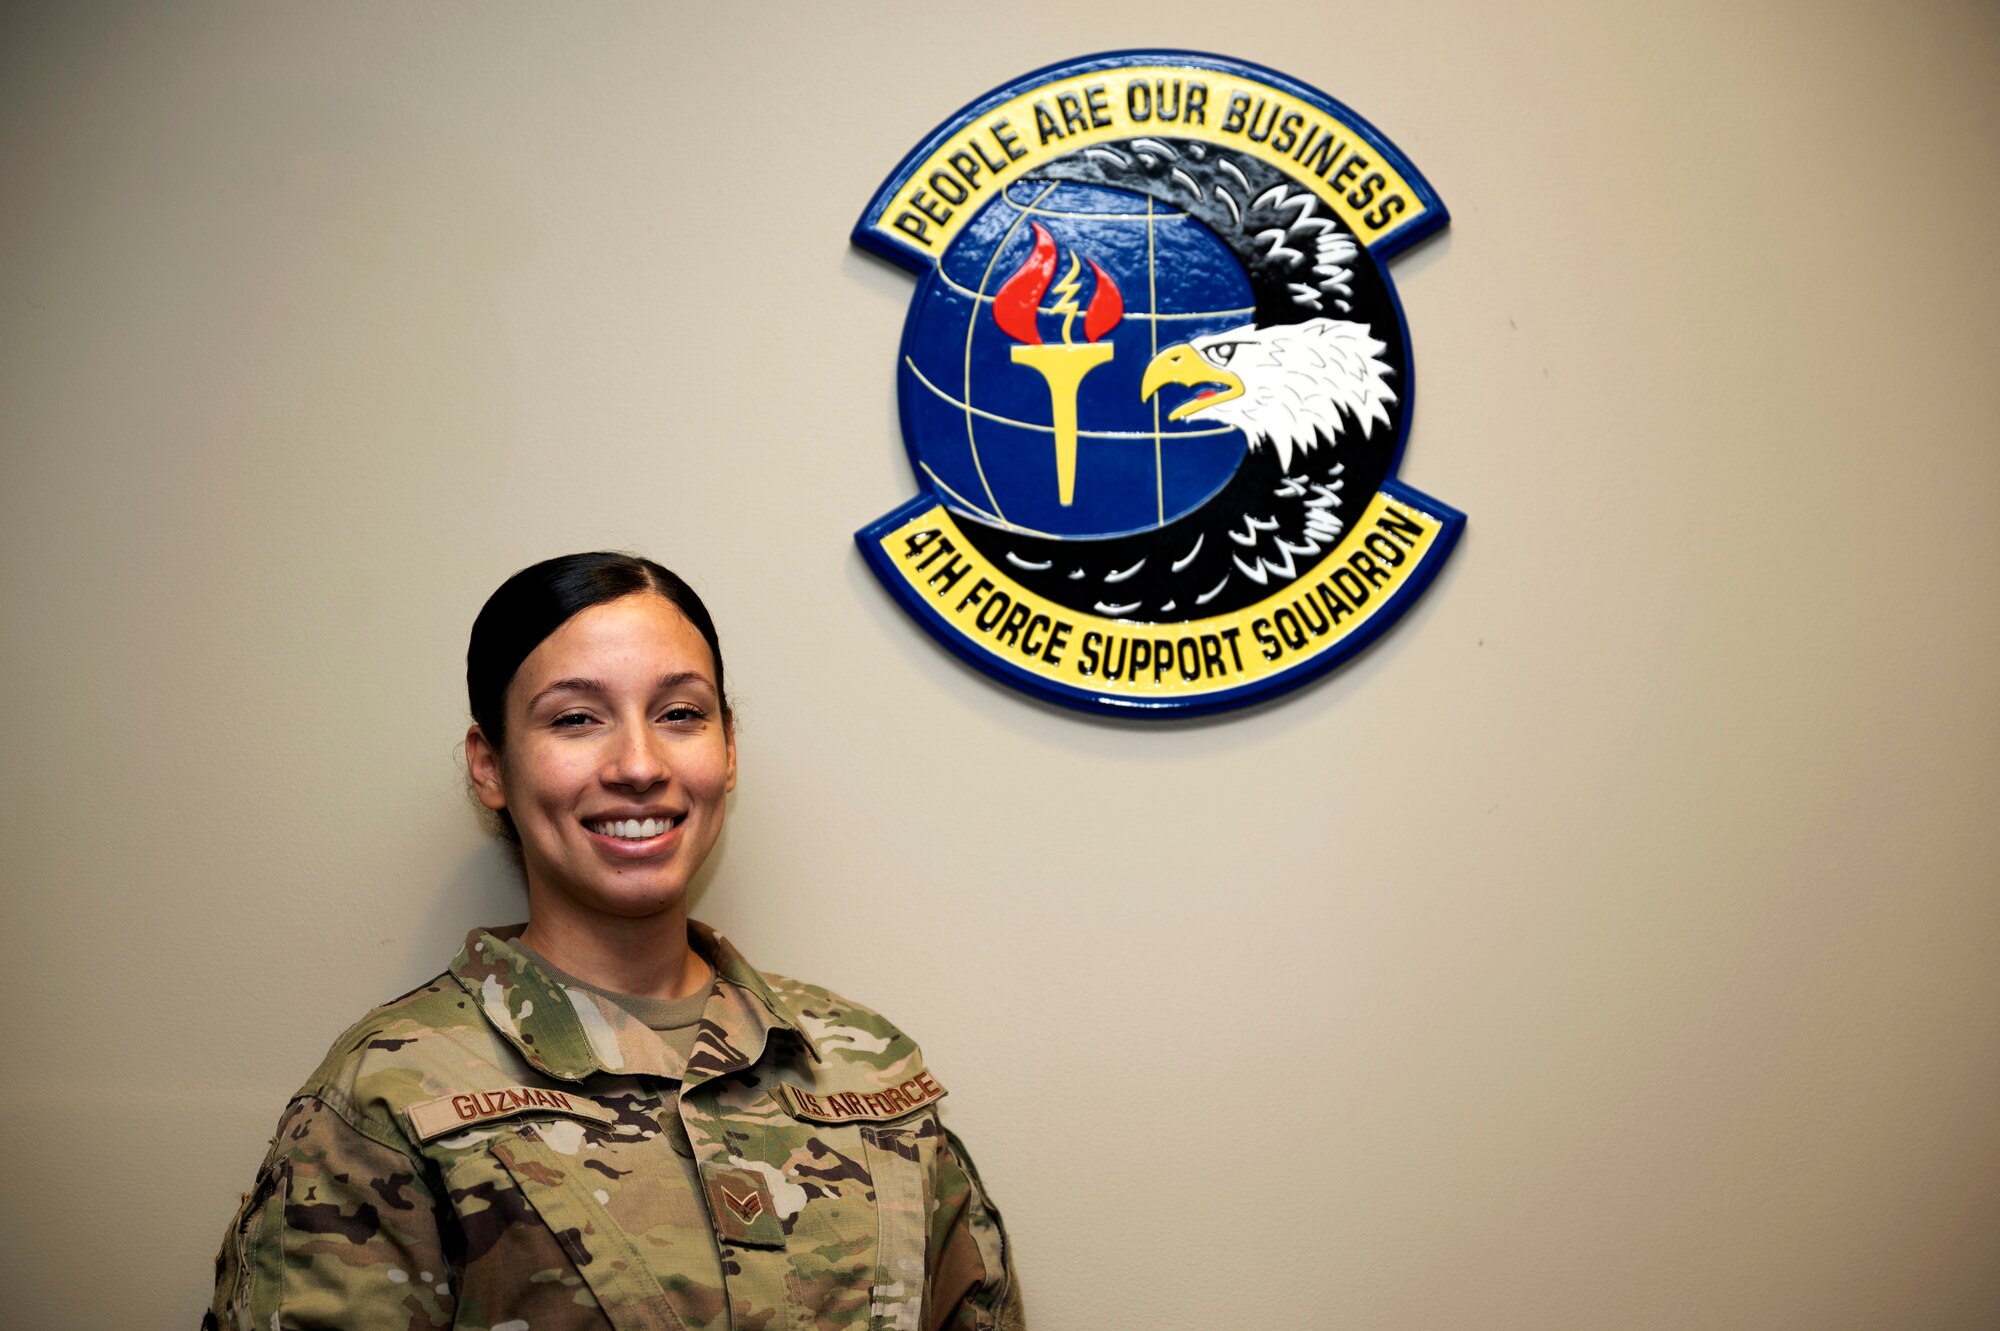 Senior Airman Teresa Guzman, 4th Force Support Squadron self-assessment program manager, poses for a photo with the 4th FSS logo at Seymour Johnson Air Force Base, North Carolina, Sept. 22, 2021. Guzman has been in for three years and plans to continue her service past her current enlistment. (U.S. Air Force photo by Senior Airman David Lynn)